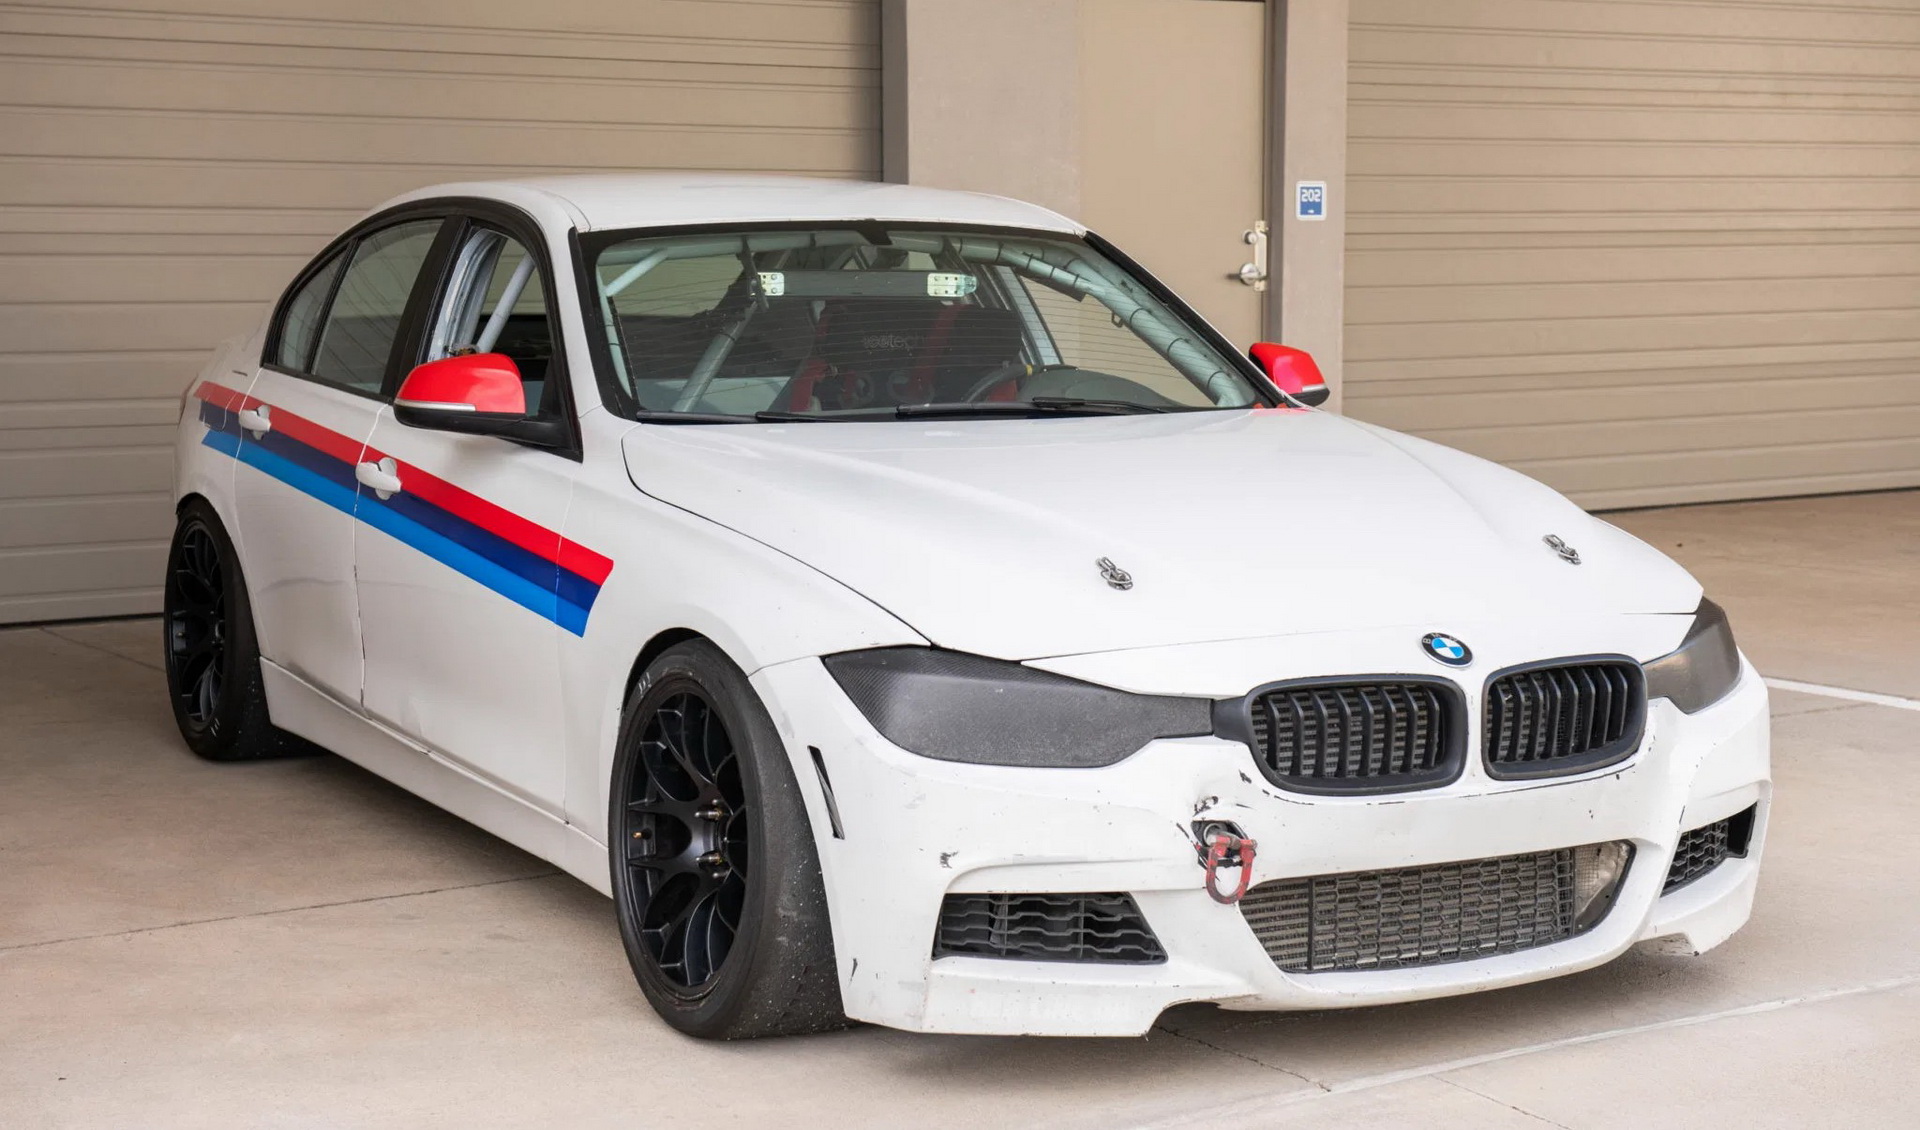 Hoofd Vergevingsgezind Kwalificatie This BMW Is The Ultimate 328i Track Racer | Carscoops